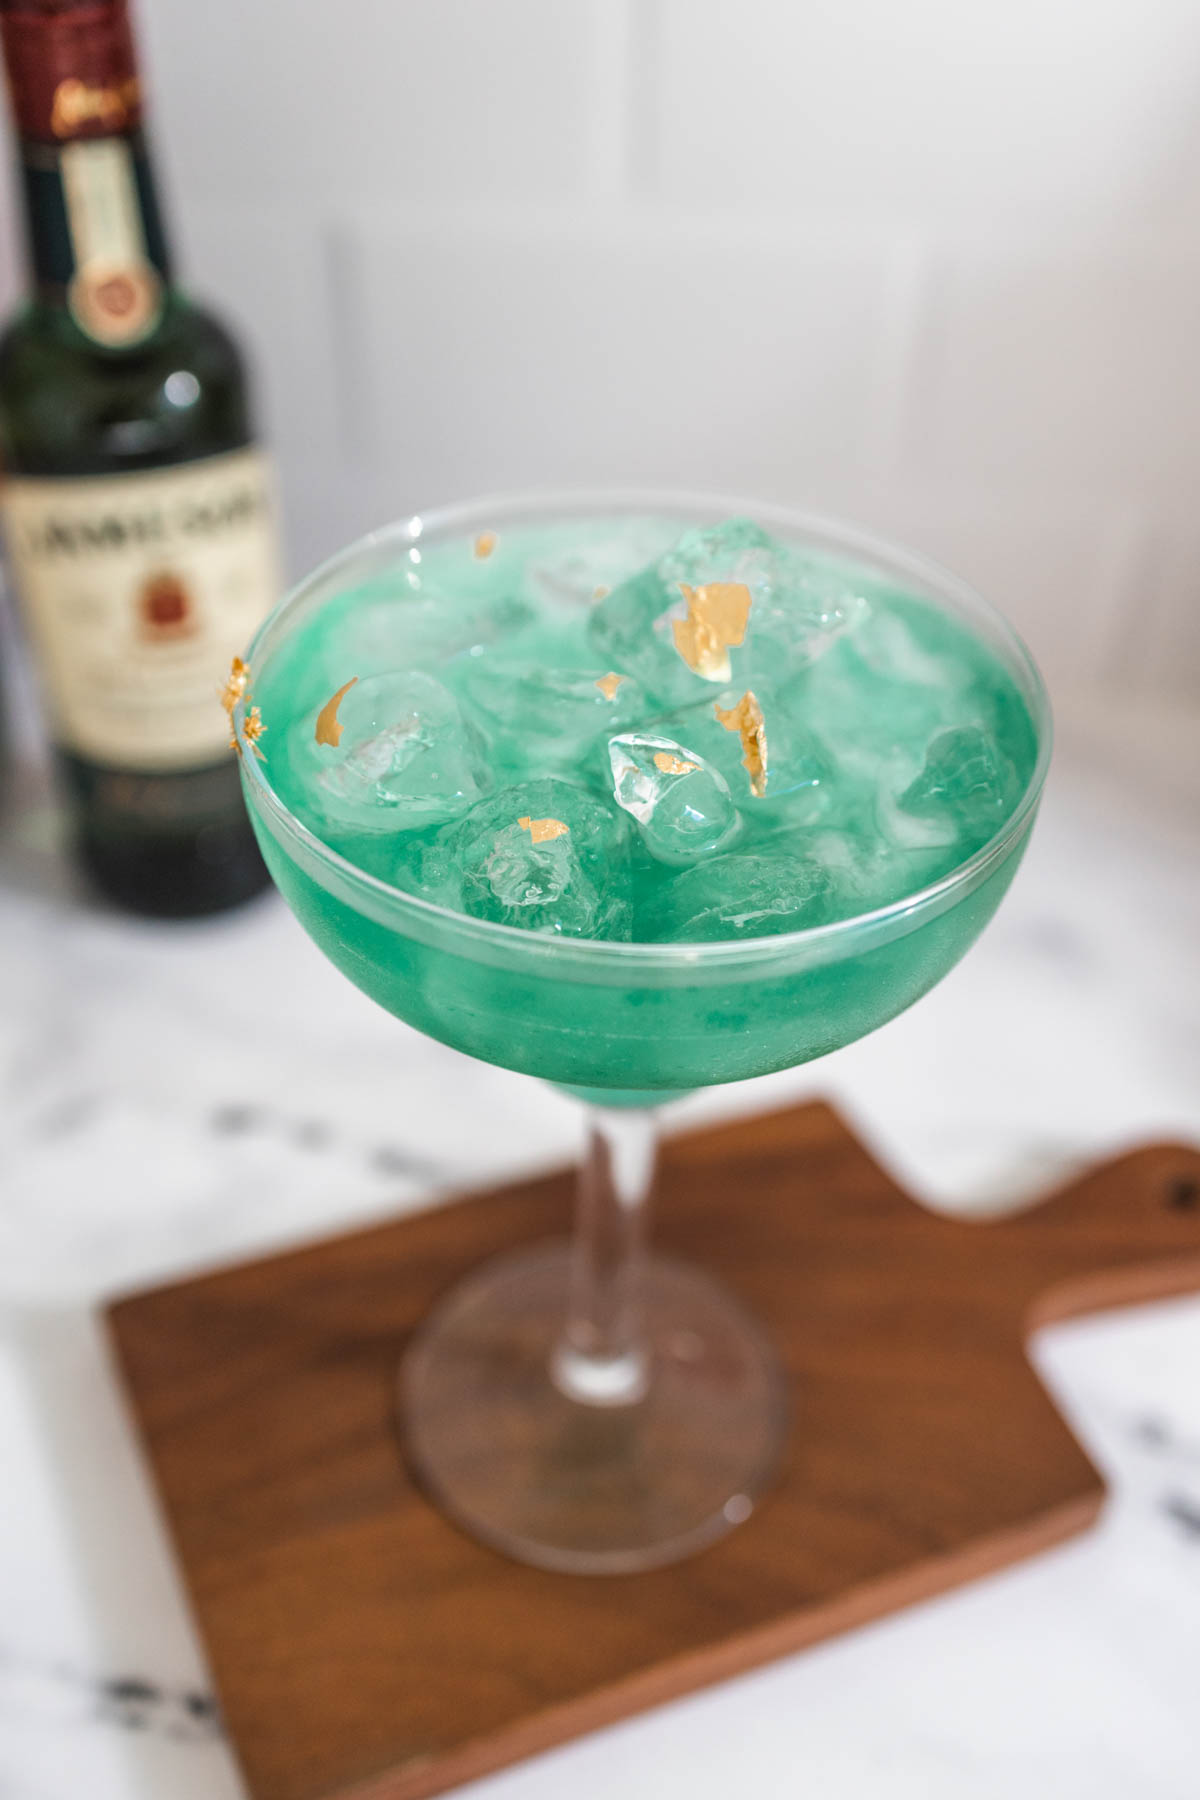 An Irish Margarita for St. Patrick's Day with green glitter and edible gold leaf.